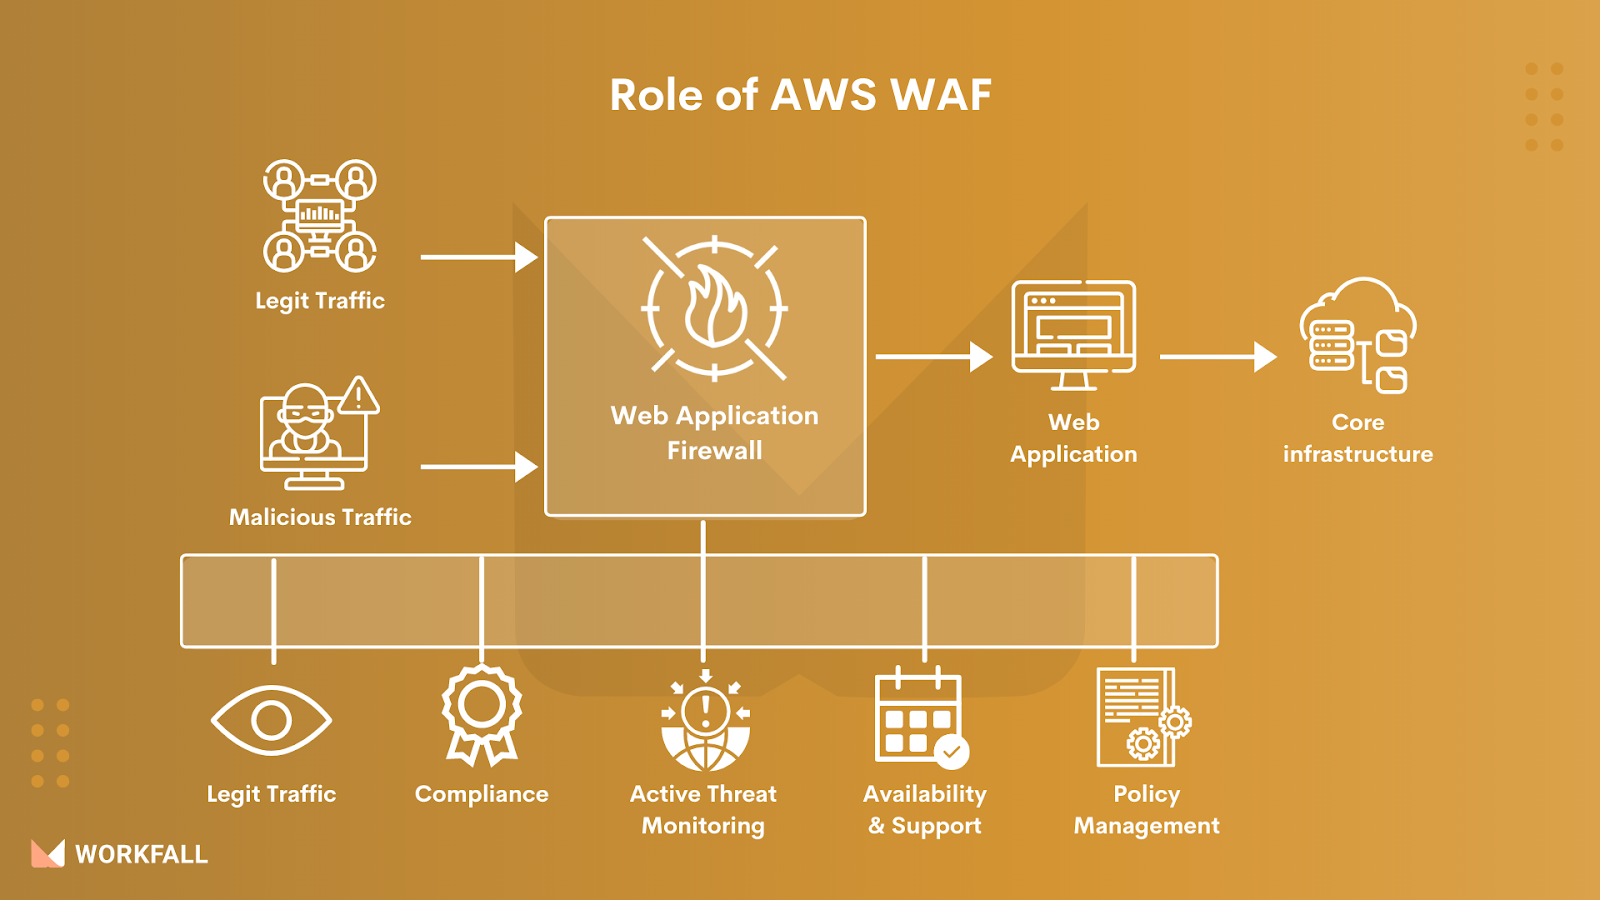 Role of AWS AWF